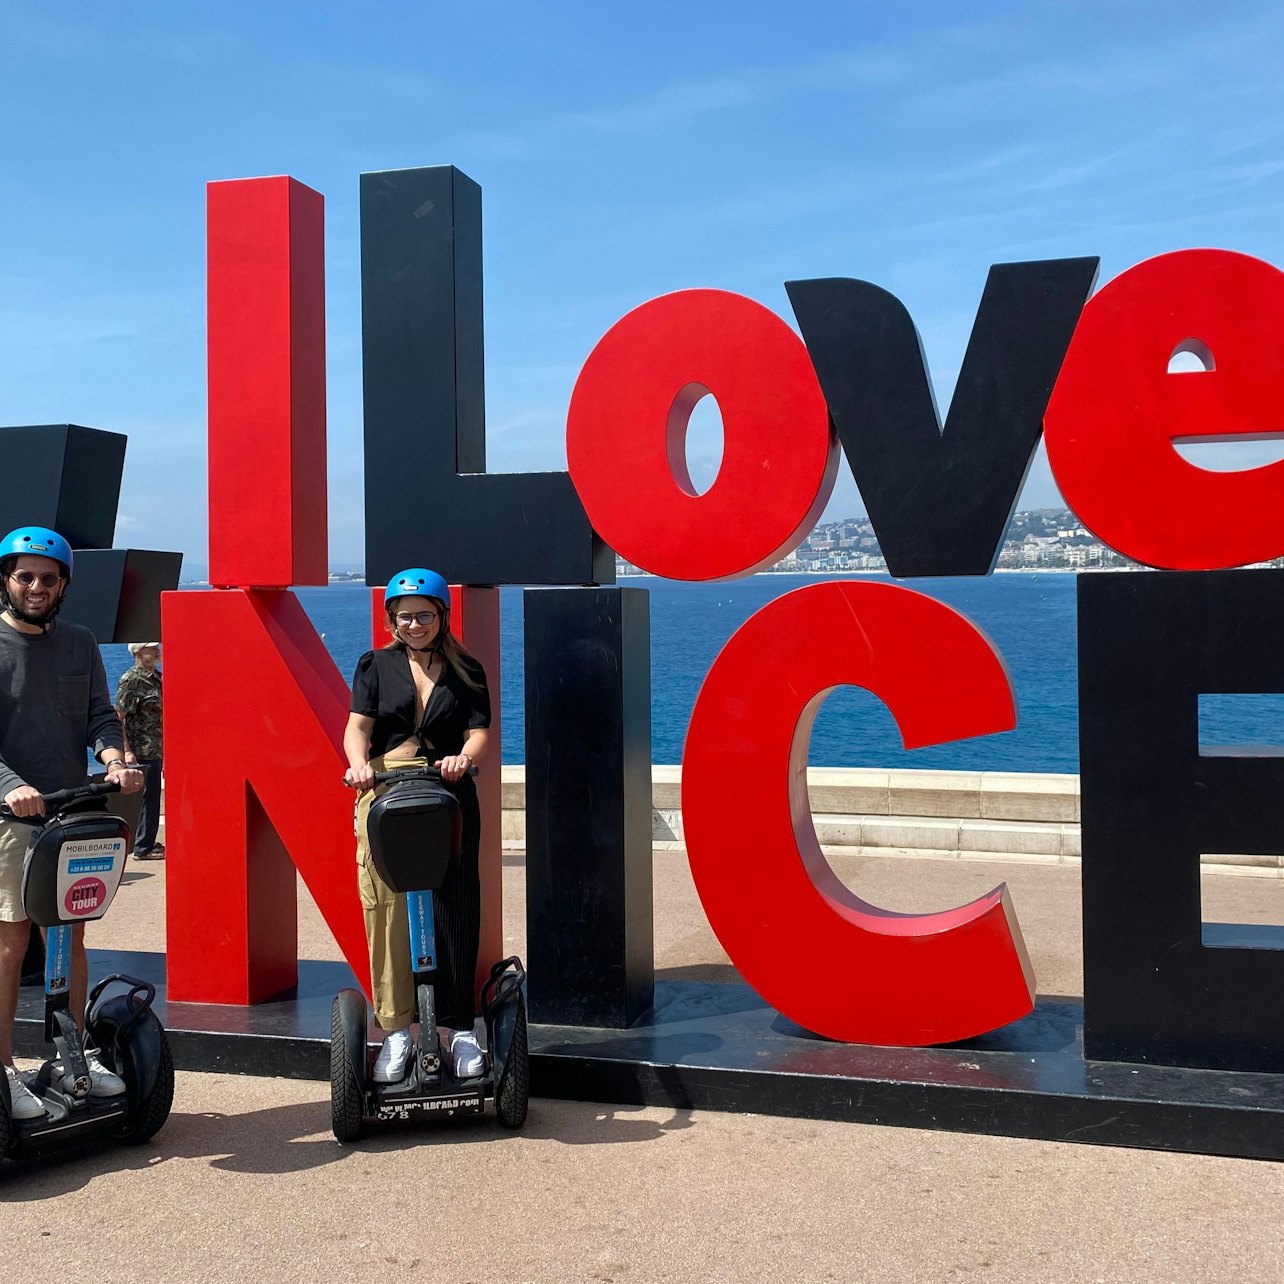 Nice: 2-Hr Guided Segway Tour - Accommodations in Nice